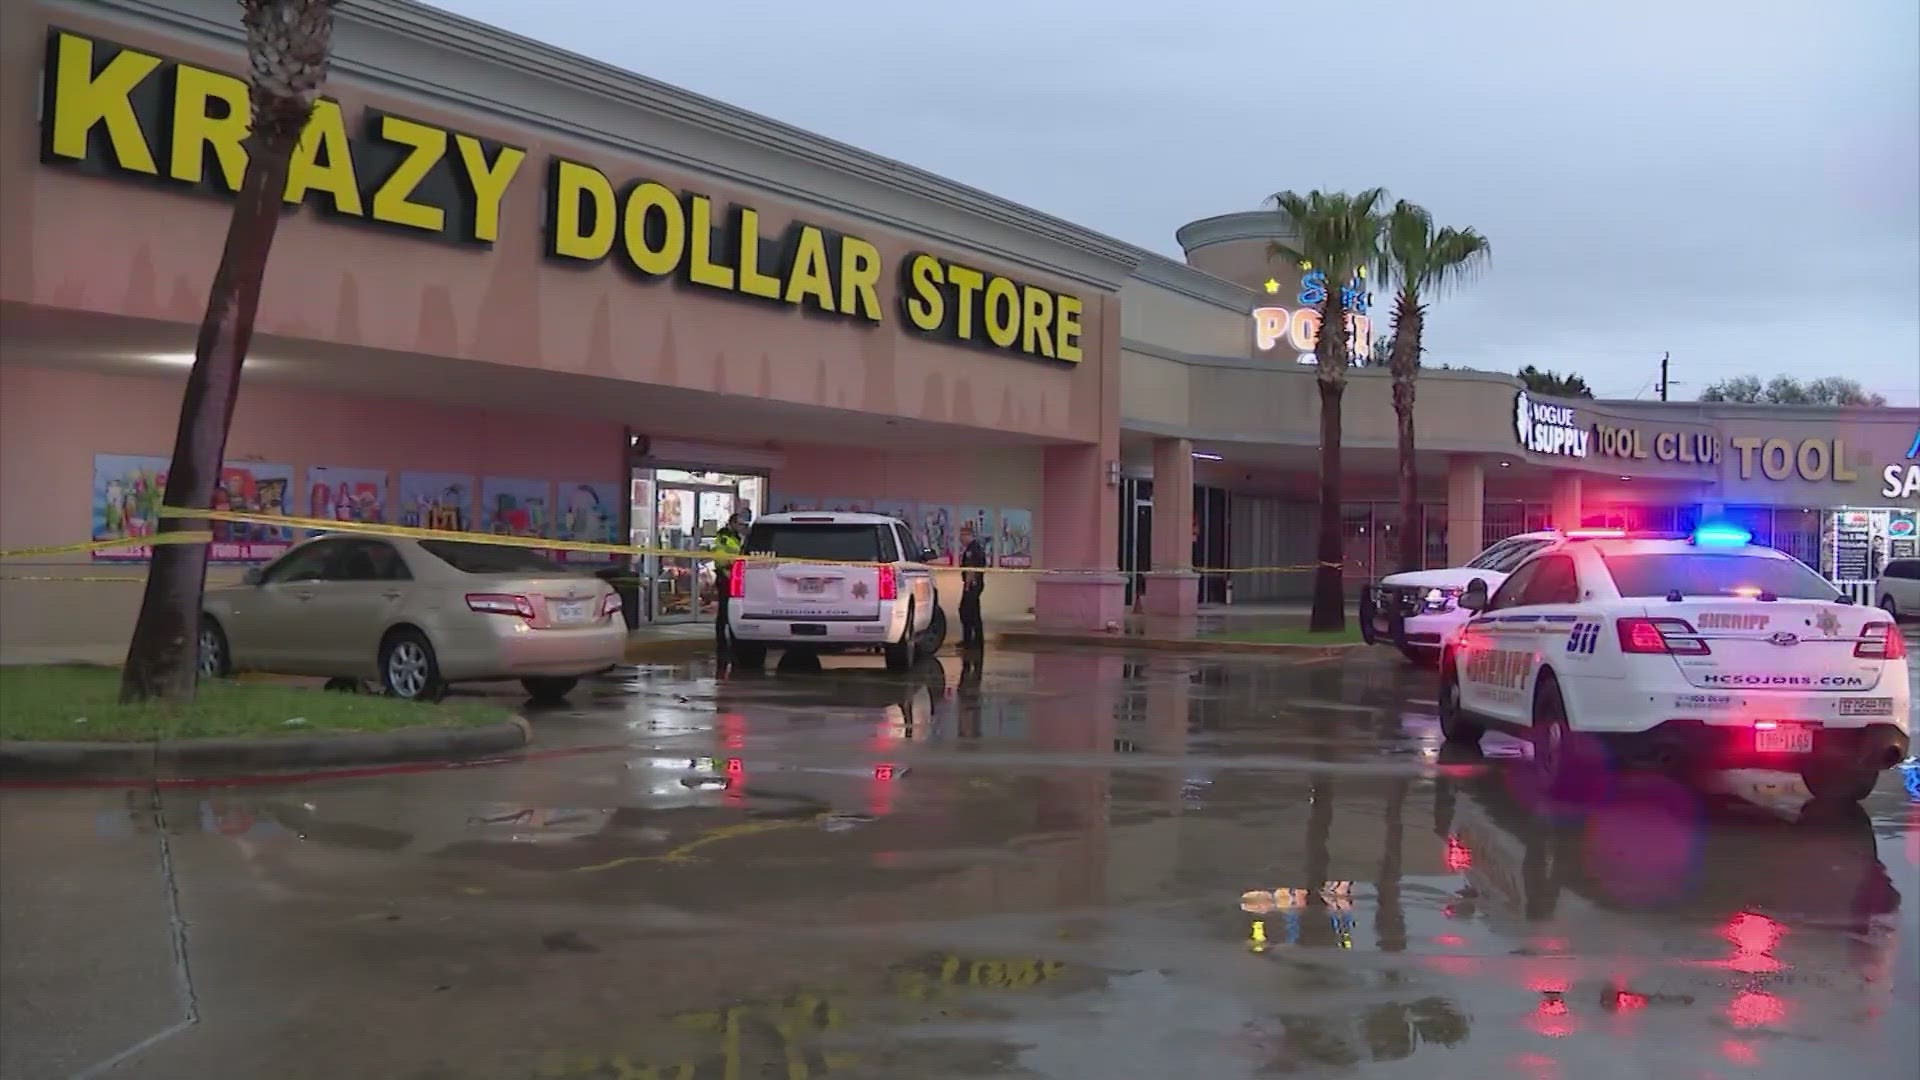 A robbery suspect was shot during an operation in which authorities were looking for suspects who had reportedly committed multiple robberies in the area.